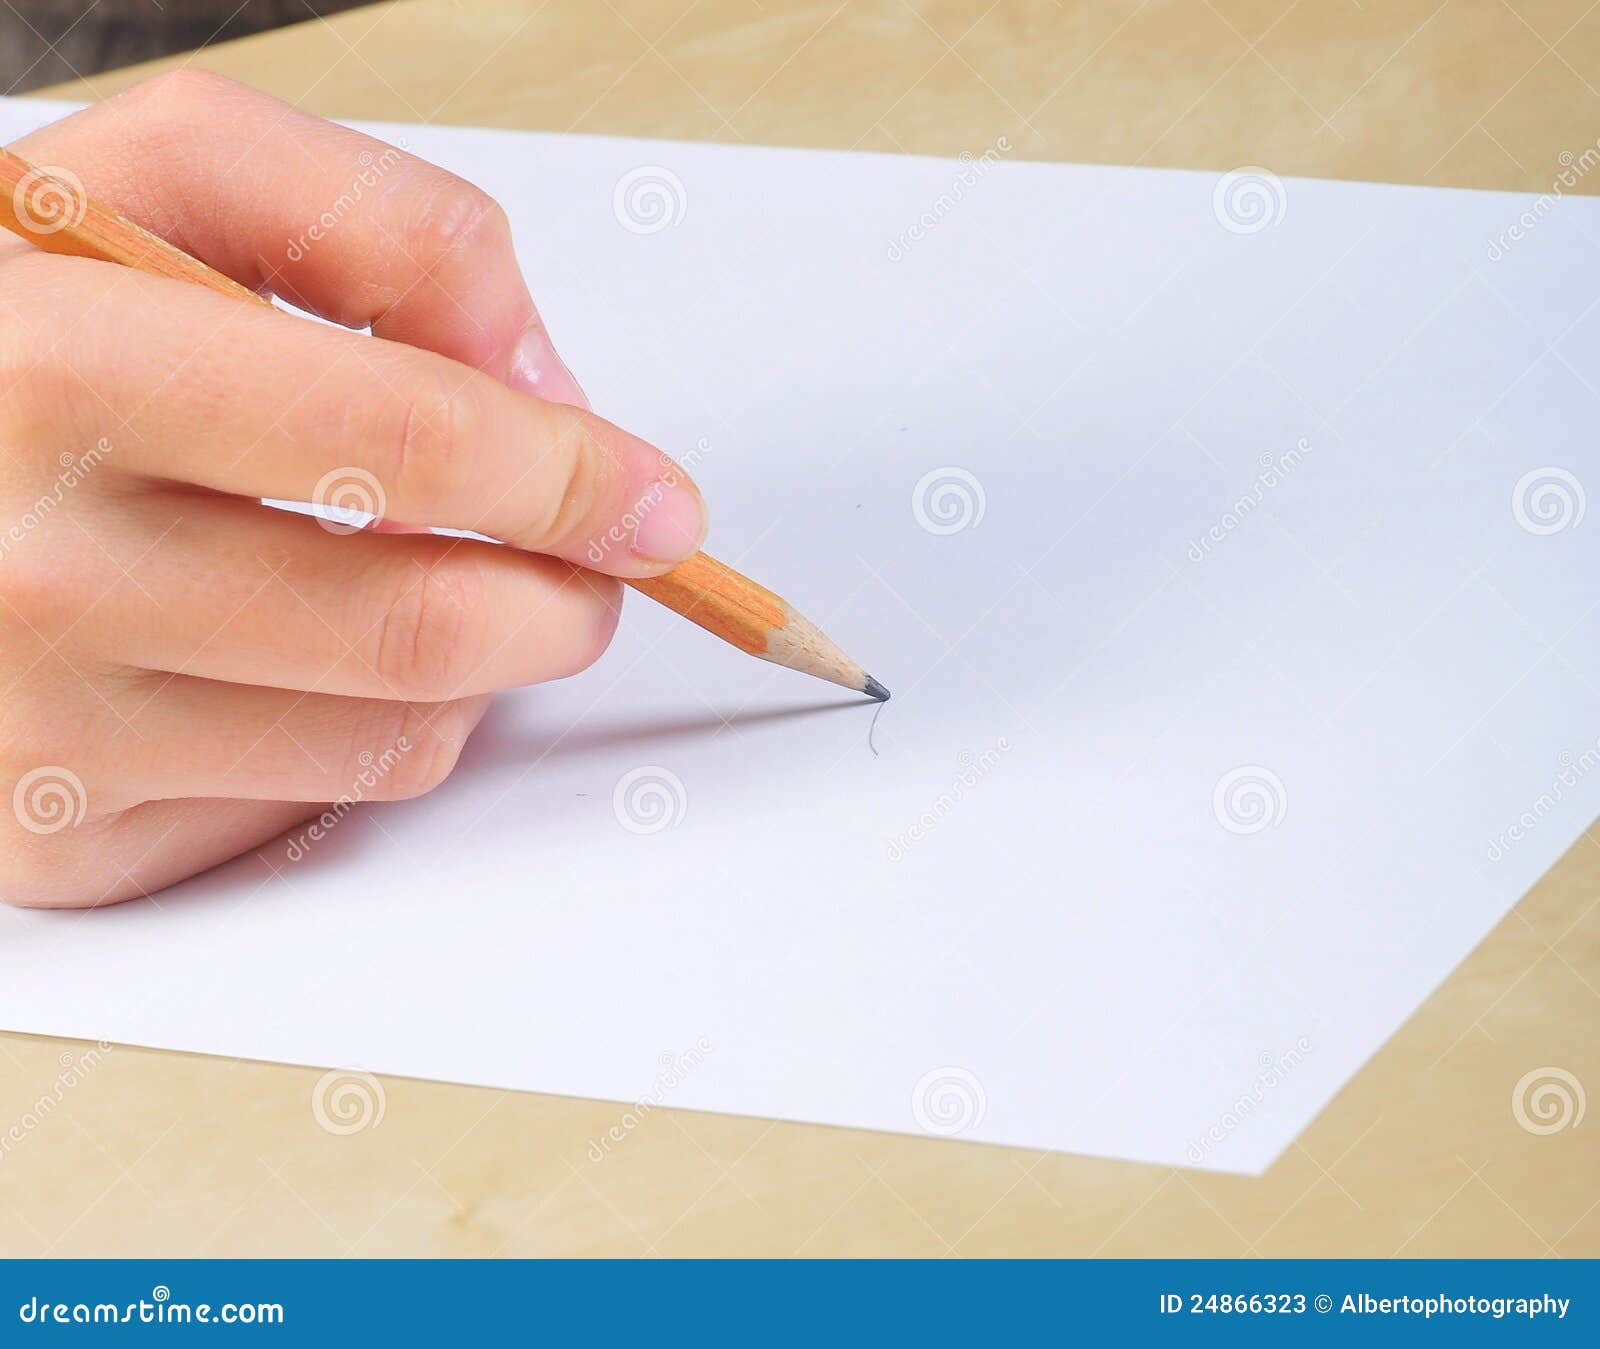 Paper with writing on it